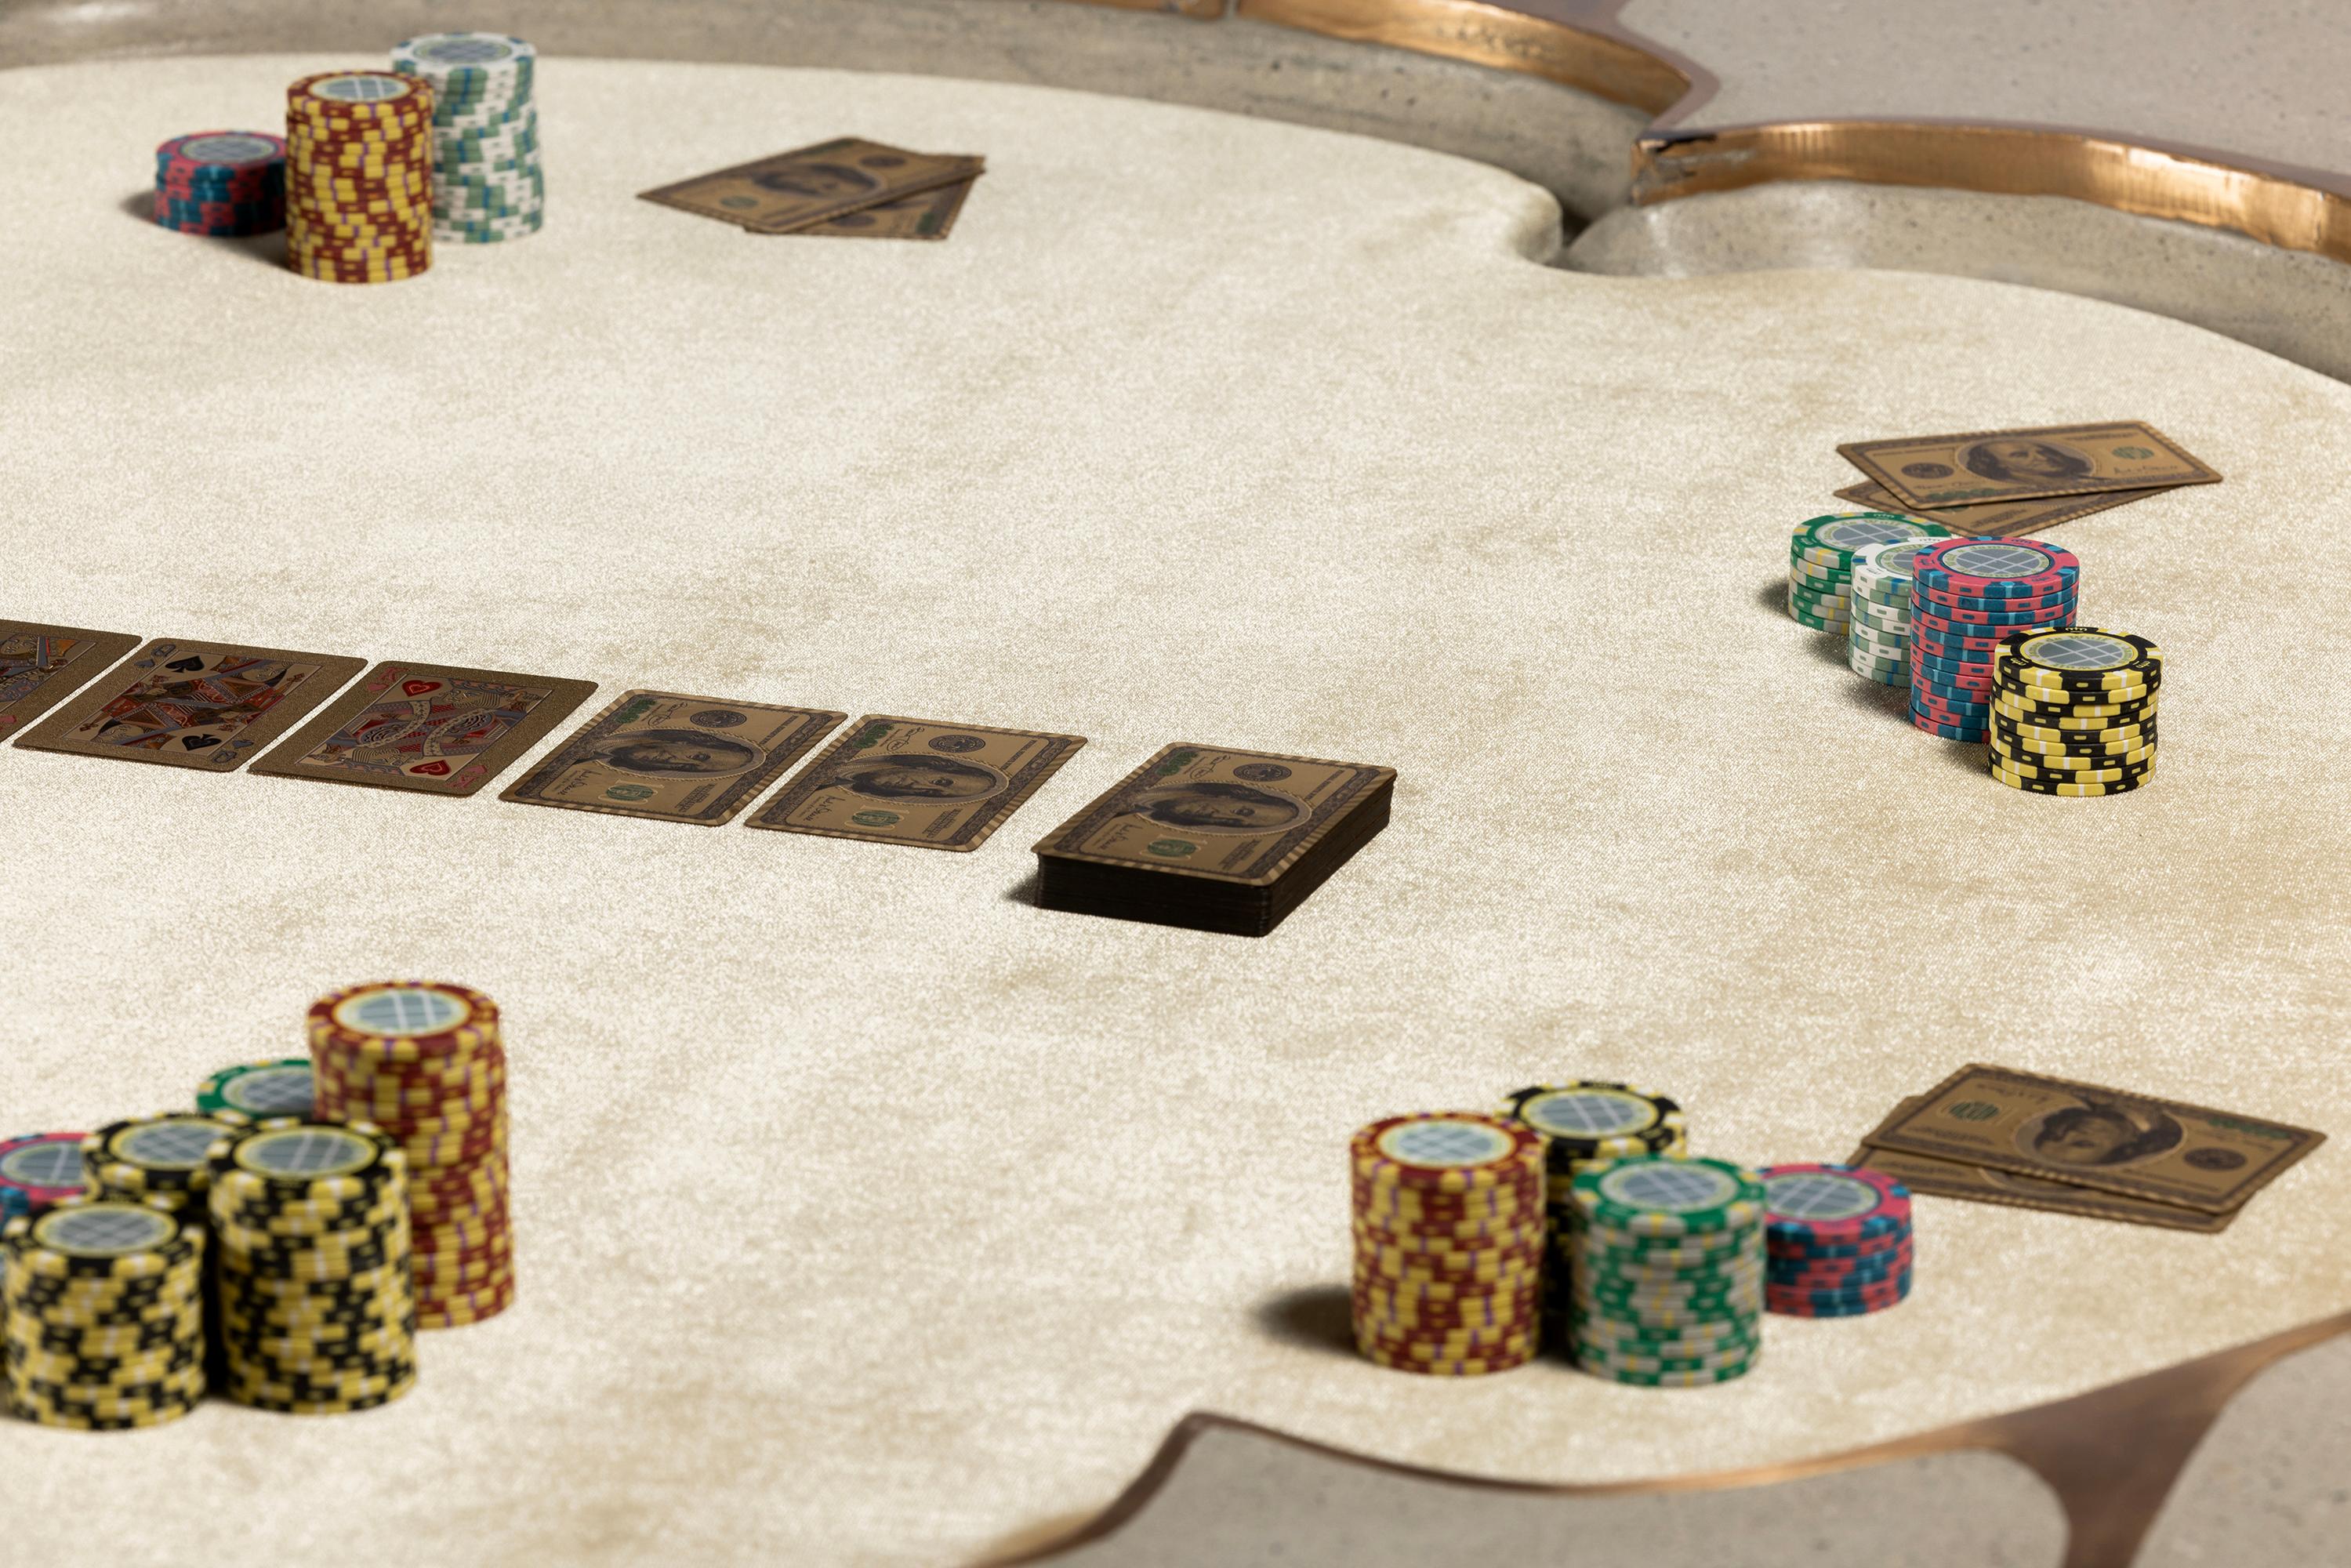 American James de Wulf Exo Imperial Poker Table For Sale